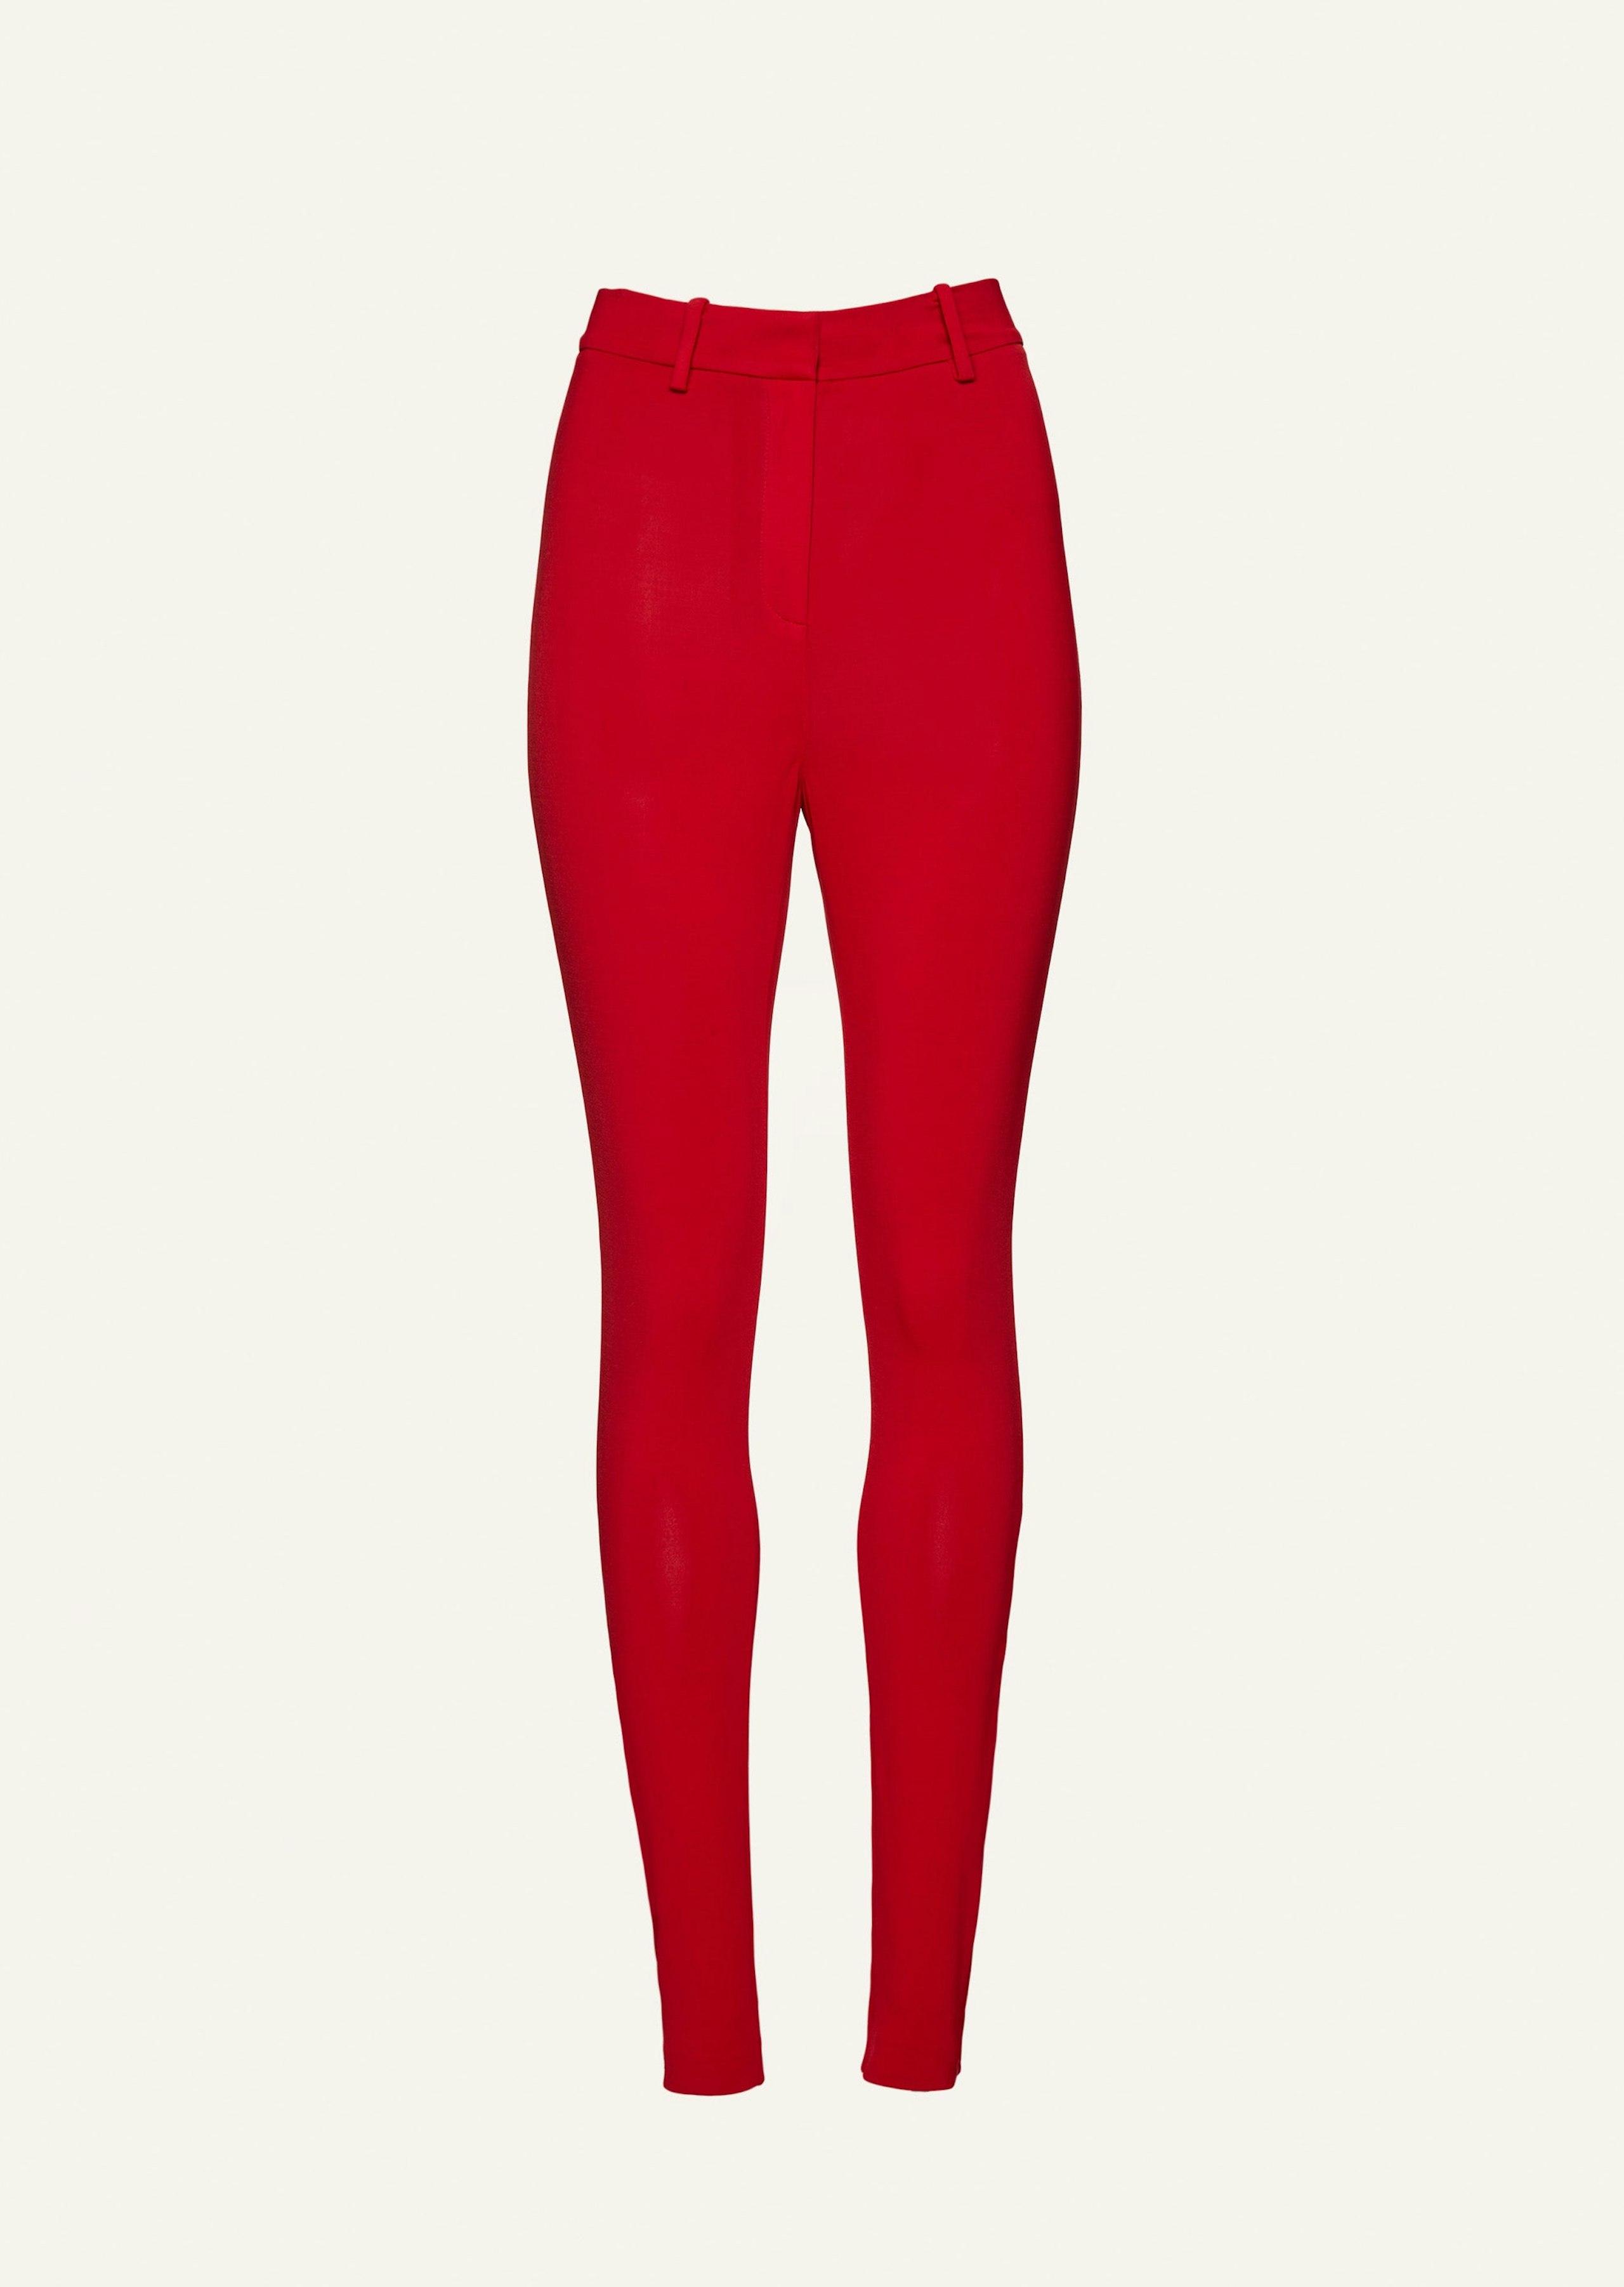 AW22 PANTS 04 RED